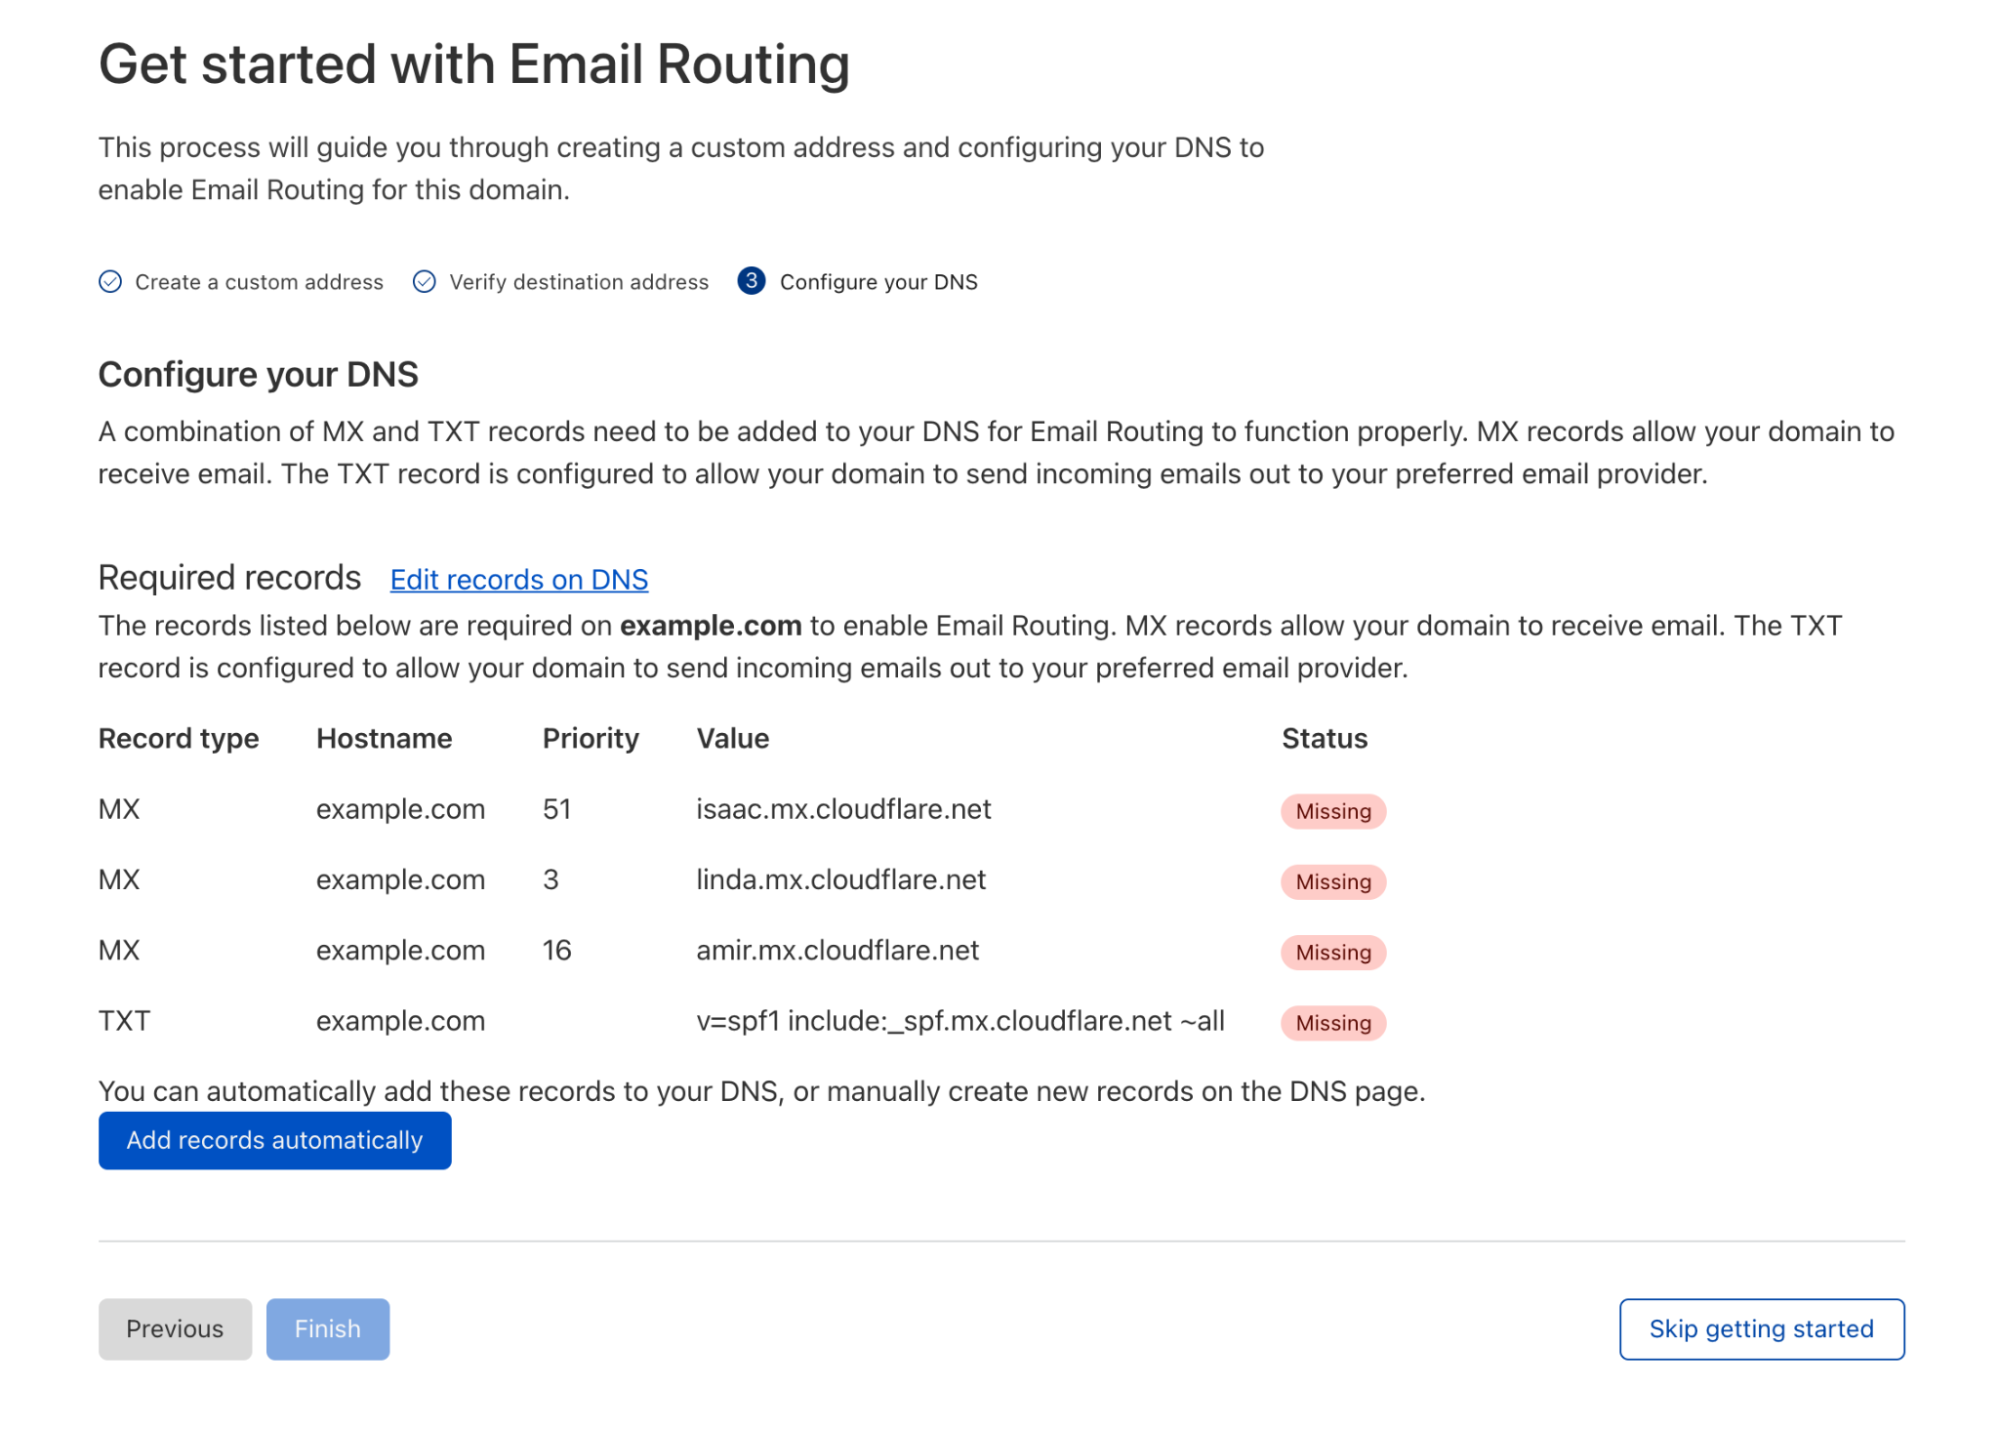 Migrating to Cloudflare Email Routing